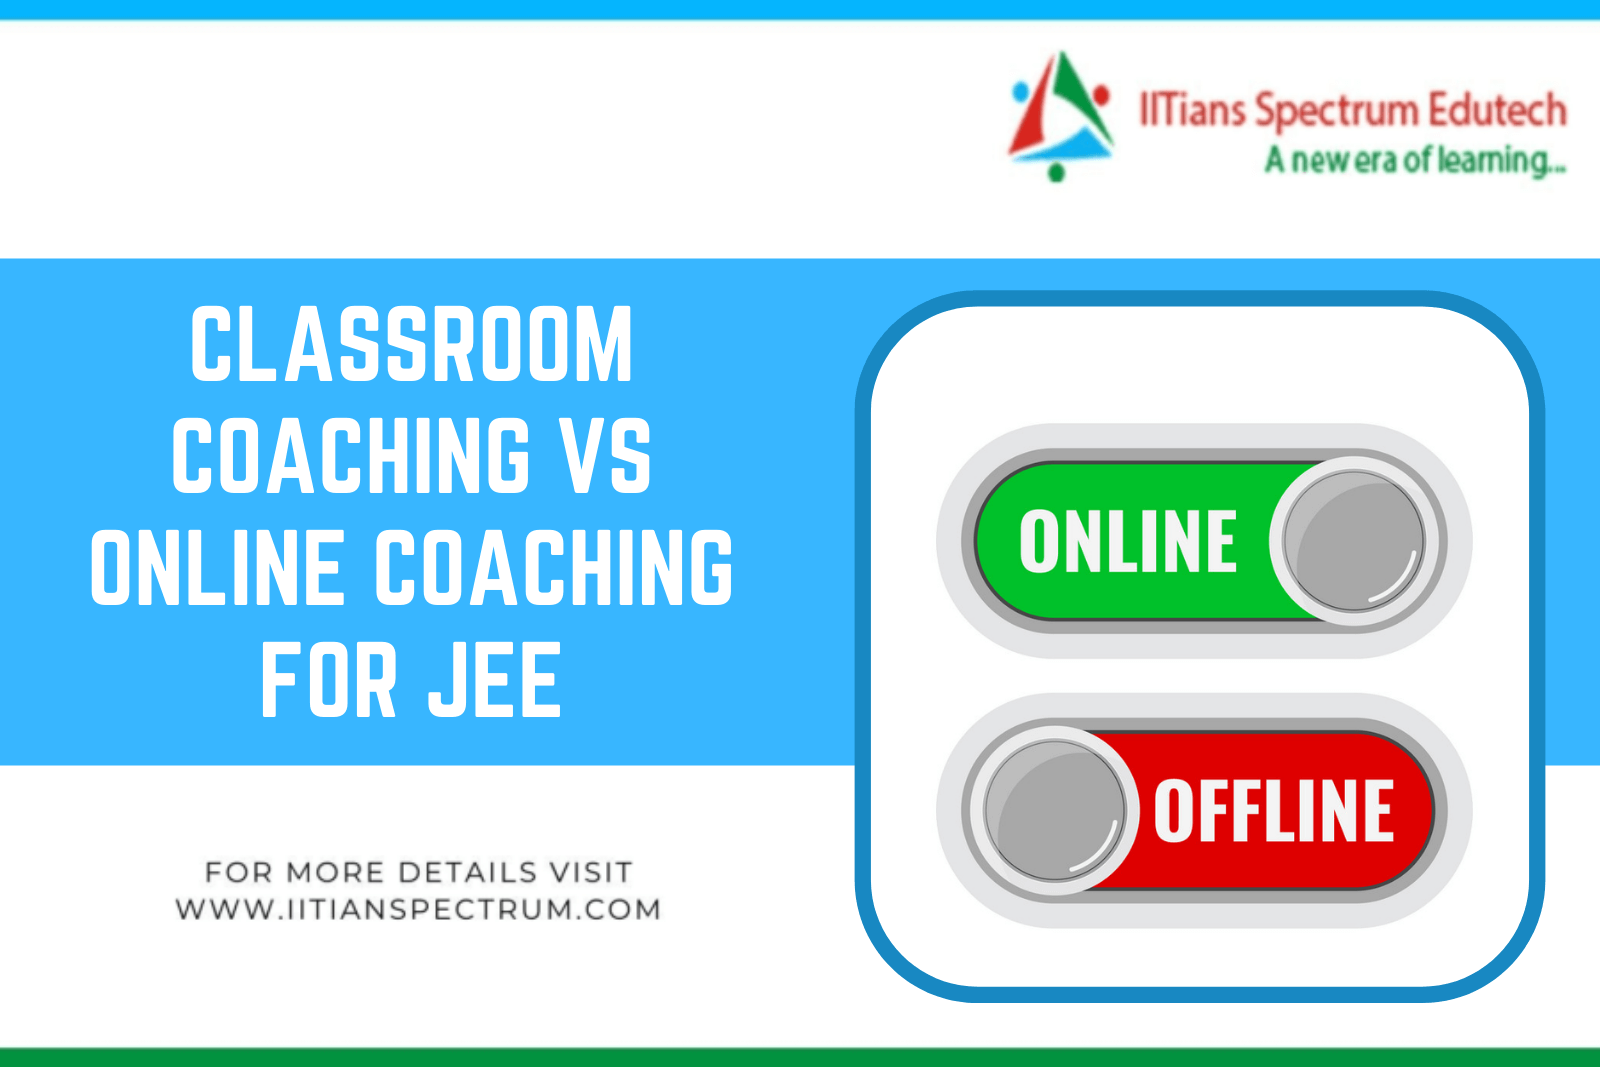 Reasons to Choose Classroom Coaching Over Online Coaching For JEE